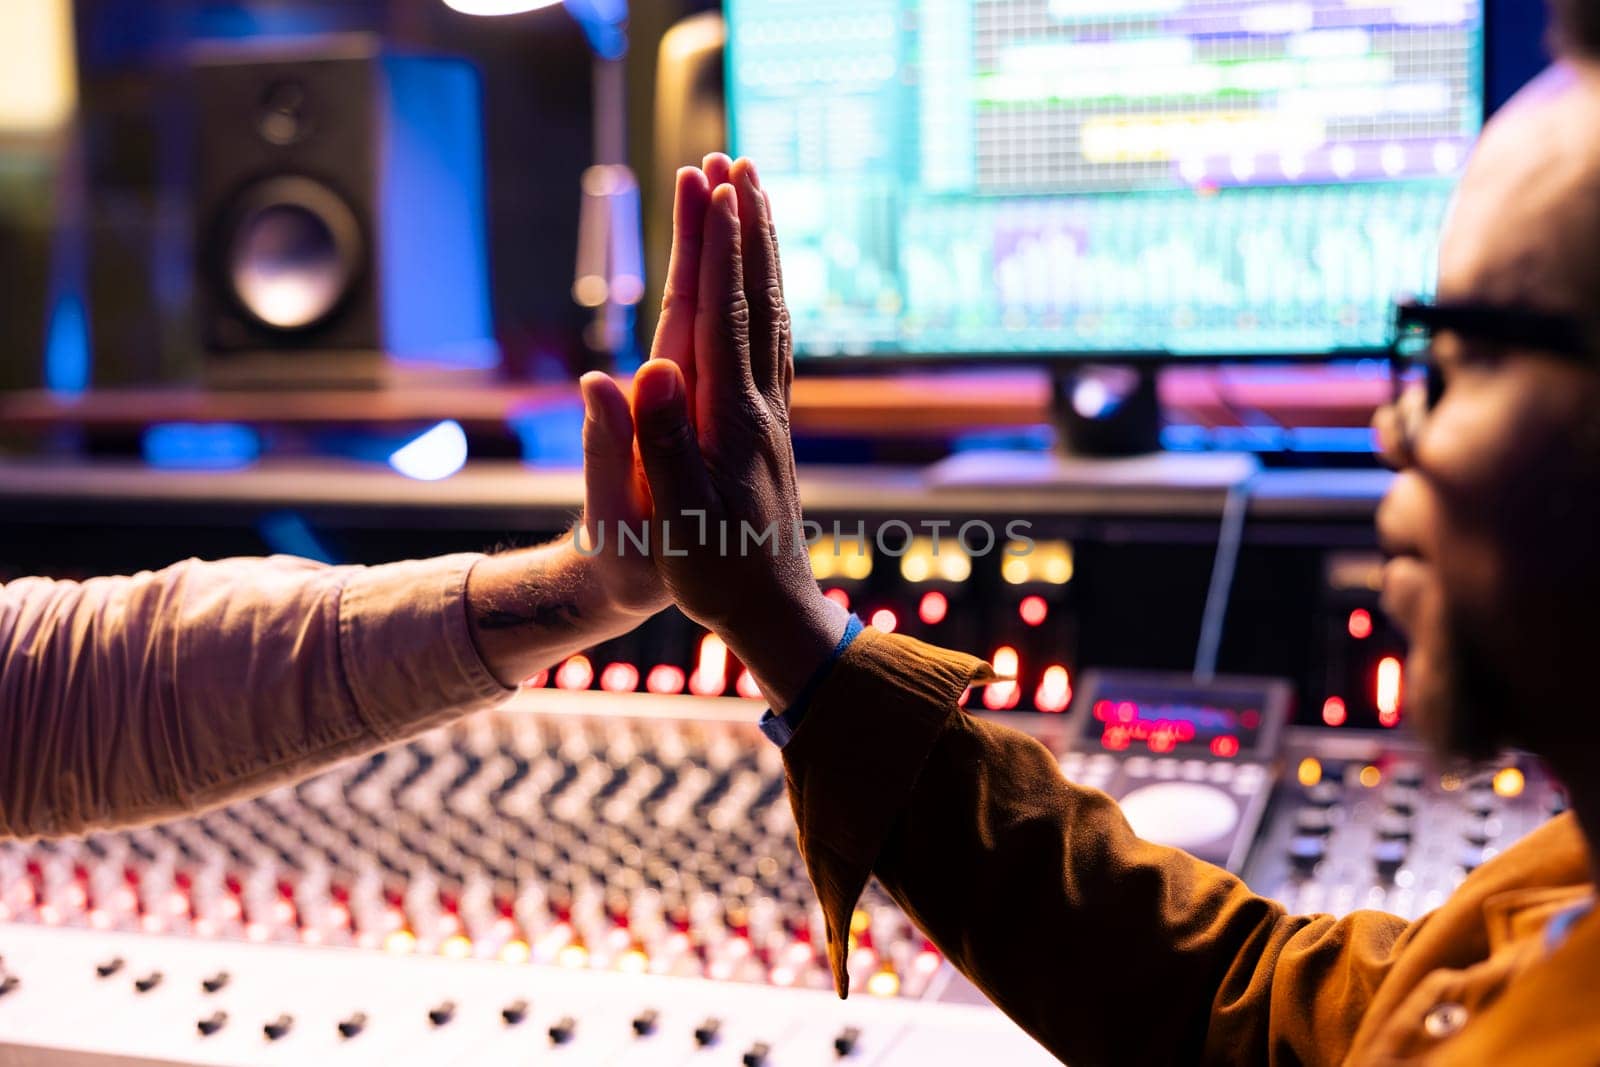 Pleased artist doing high five gesture with sound designer after finishing a song, processing and editing music for his new album. Singer and producer celebrating successful tracks in studio.